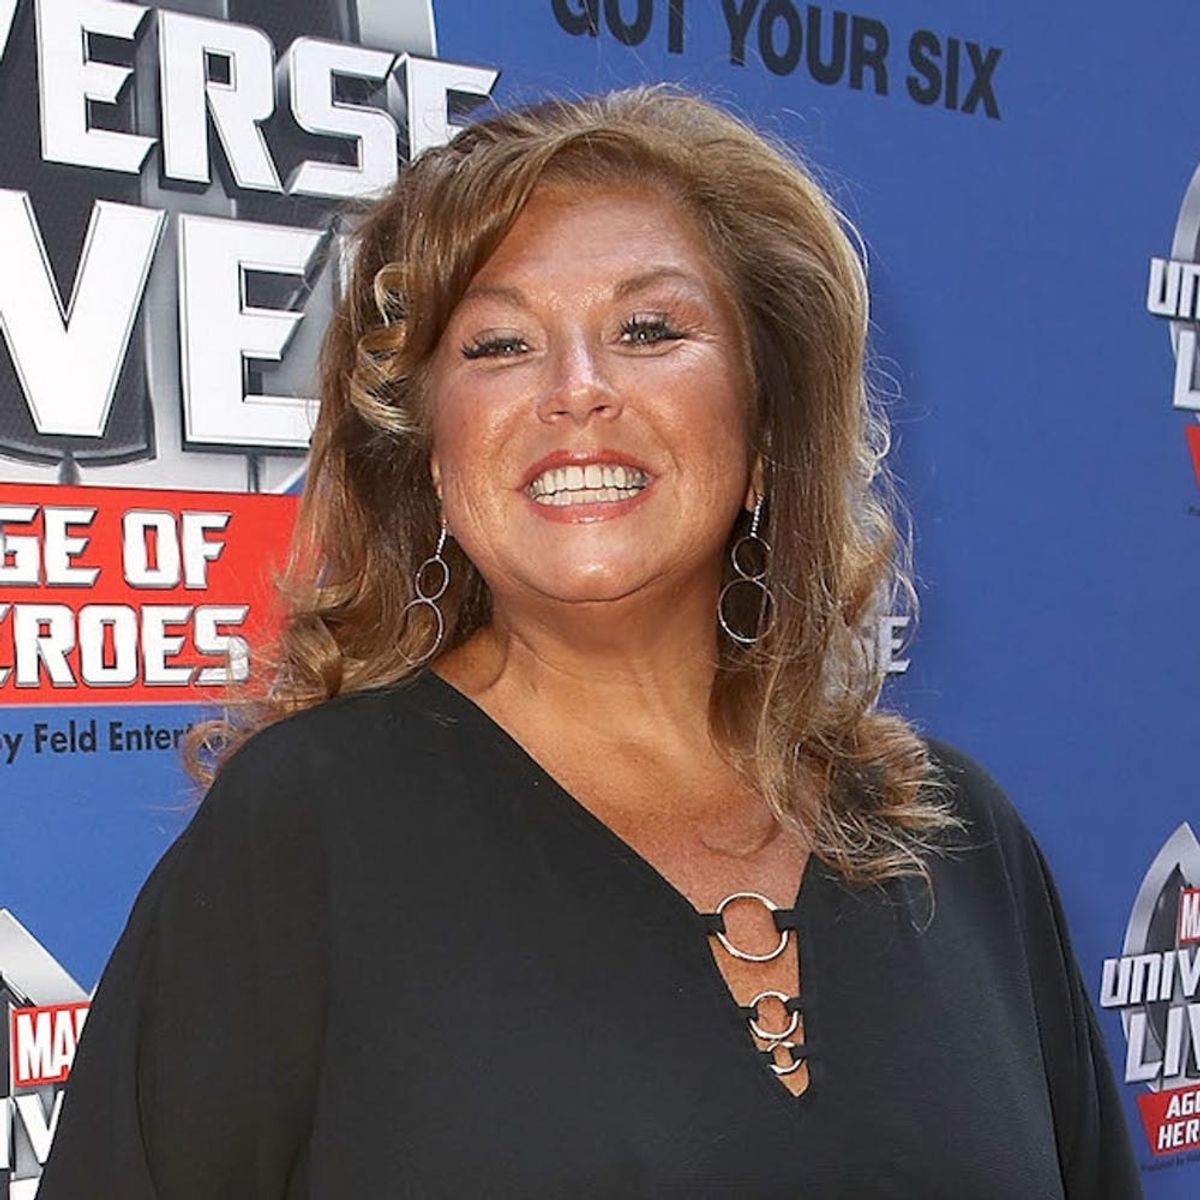 Morning Buzz! Dance Moms Star Abby Lee Miller Officially Reports to Prison on an “Extremely Emotional Day”